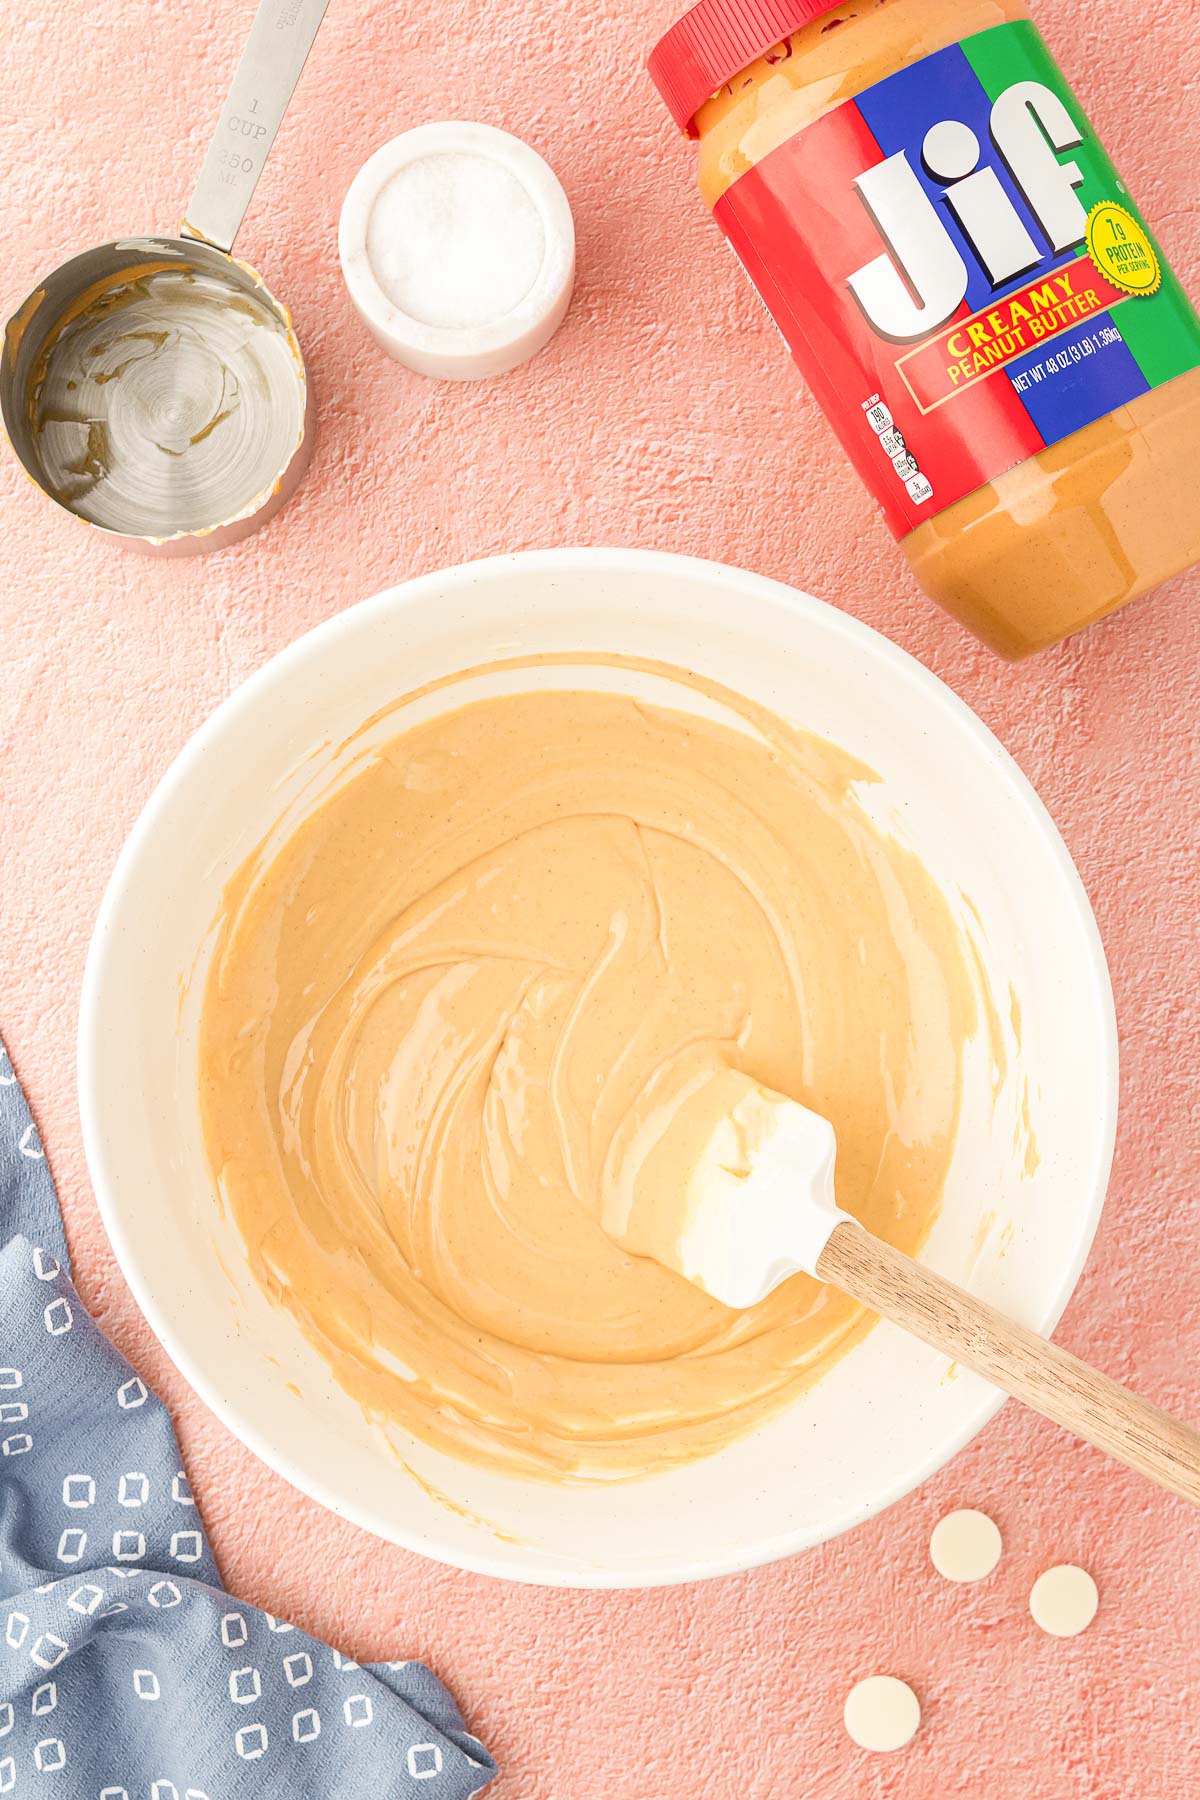 Peanut butter and white chocolate melted together in a white bowl.